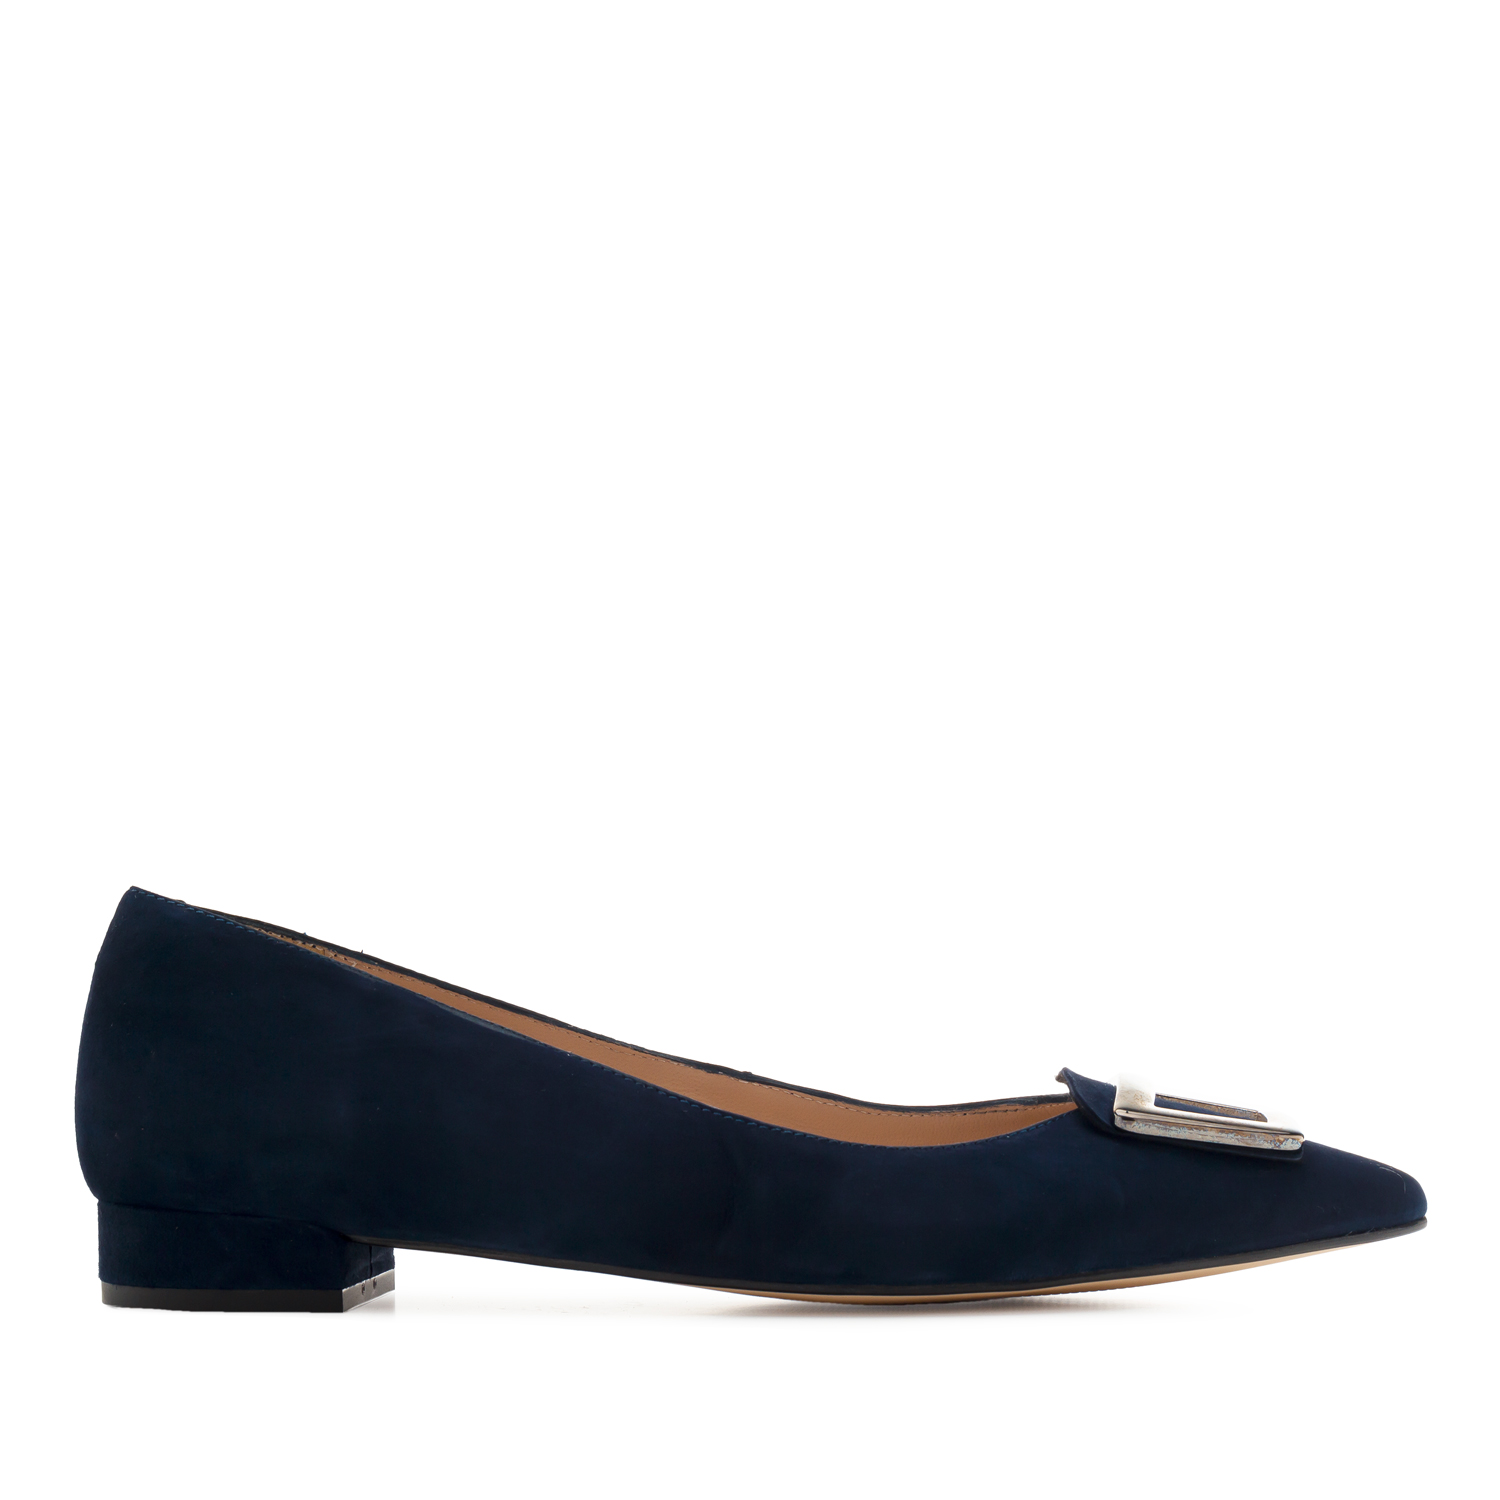 Trim Loafers in Navy Suede Leather 